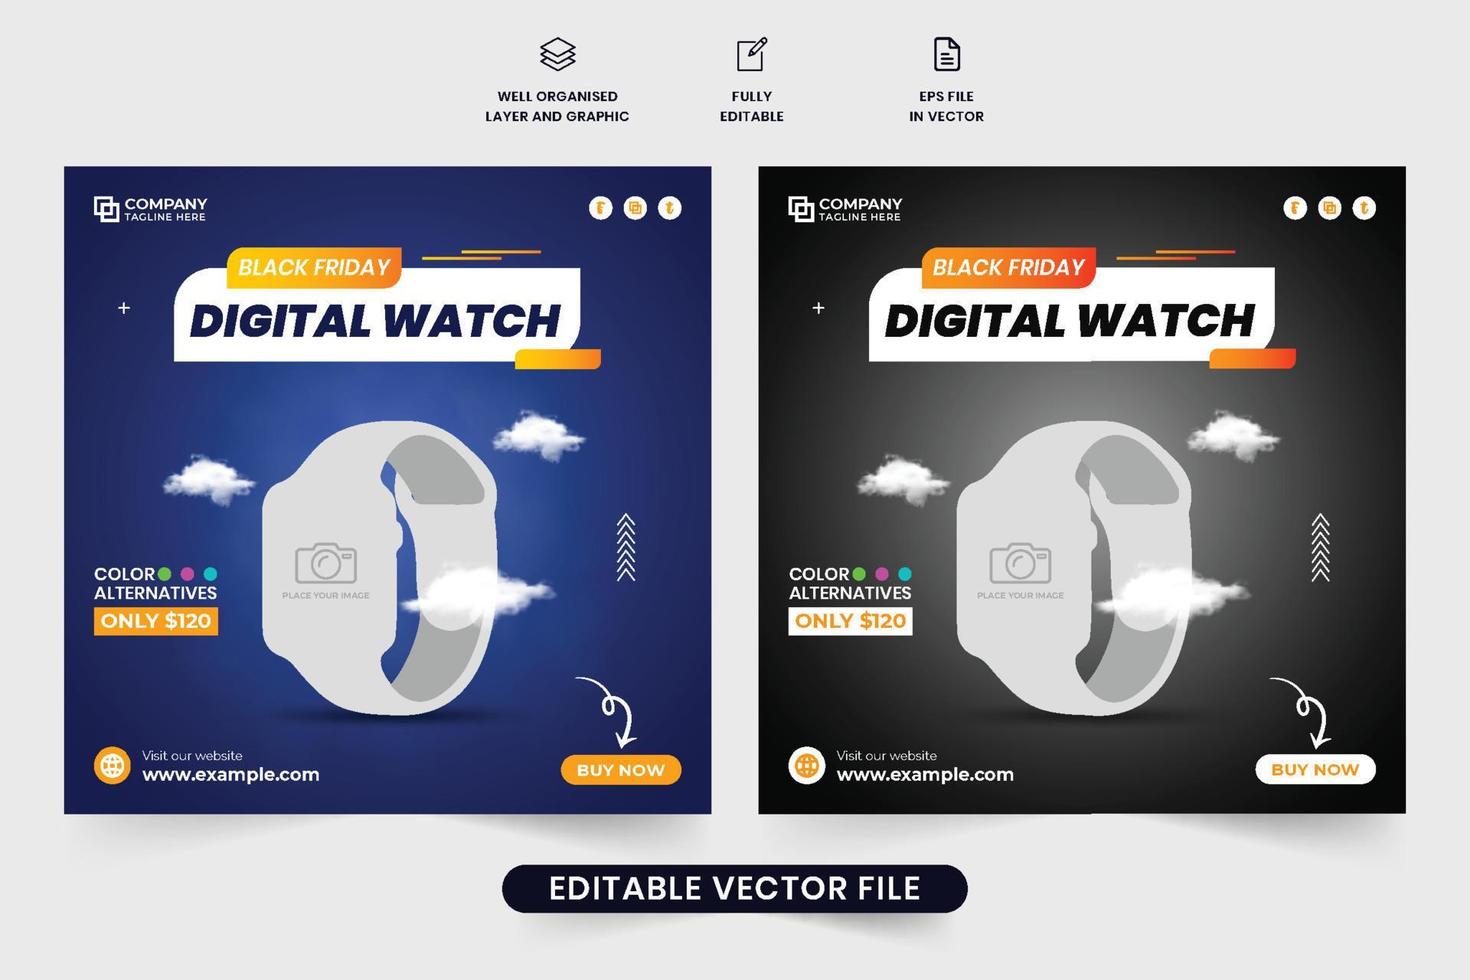 Digital watch Black Friday sale social media post template with blue and dark colors. Wristwatch business promotional web banner design. Smartwatch sale poster vector for social media marketing.